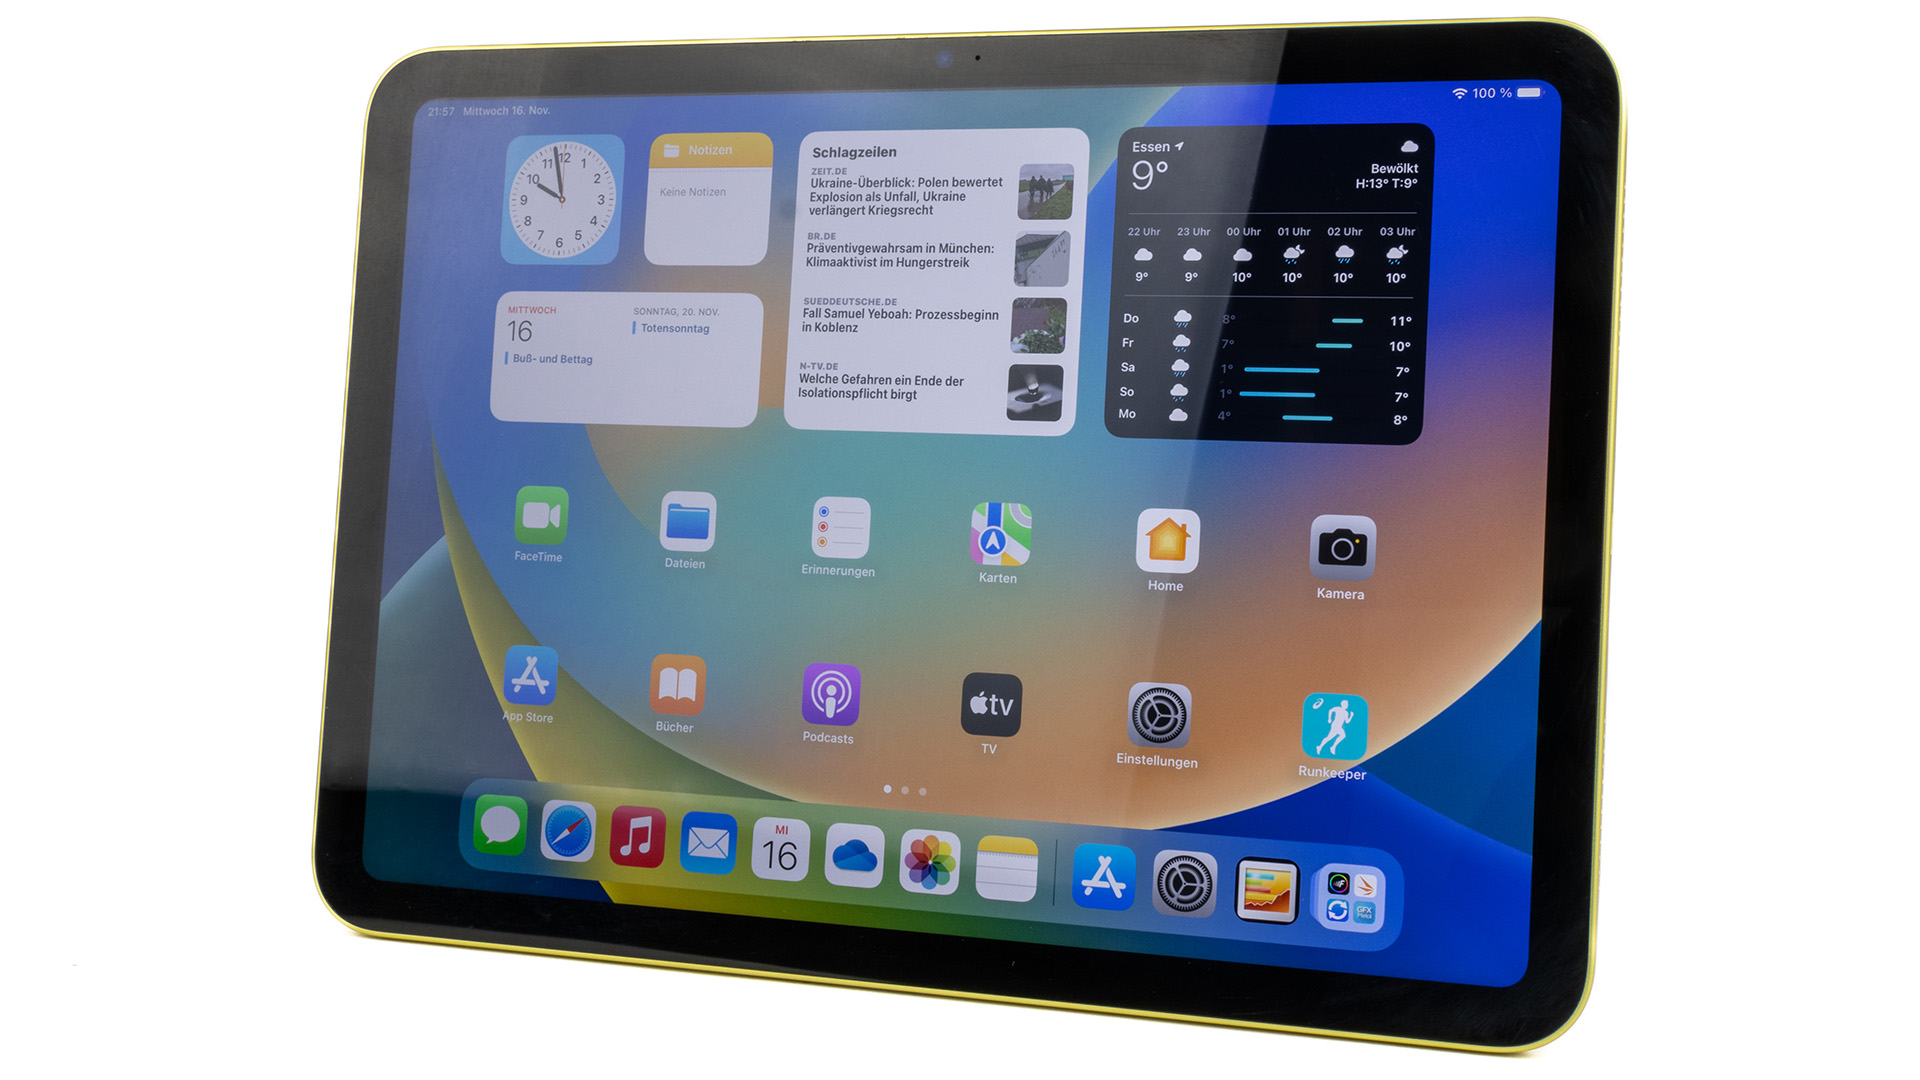 Apple 10.9-inch iPad Review - (10th Generation 2022) - The New Entry Point?  